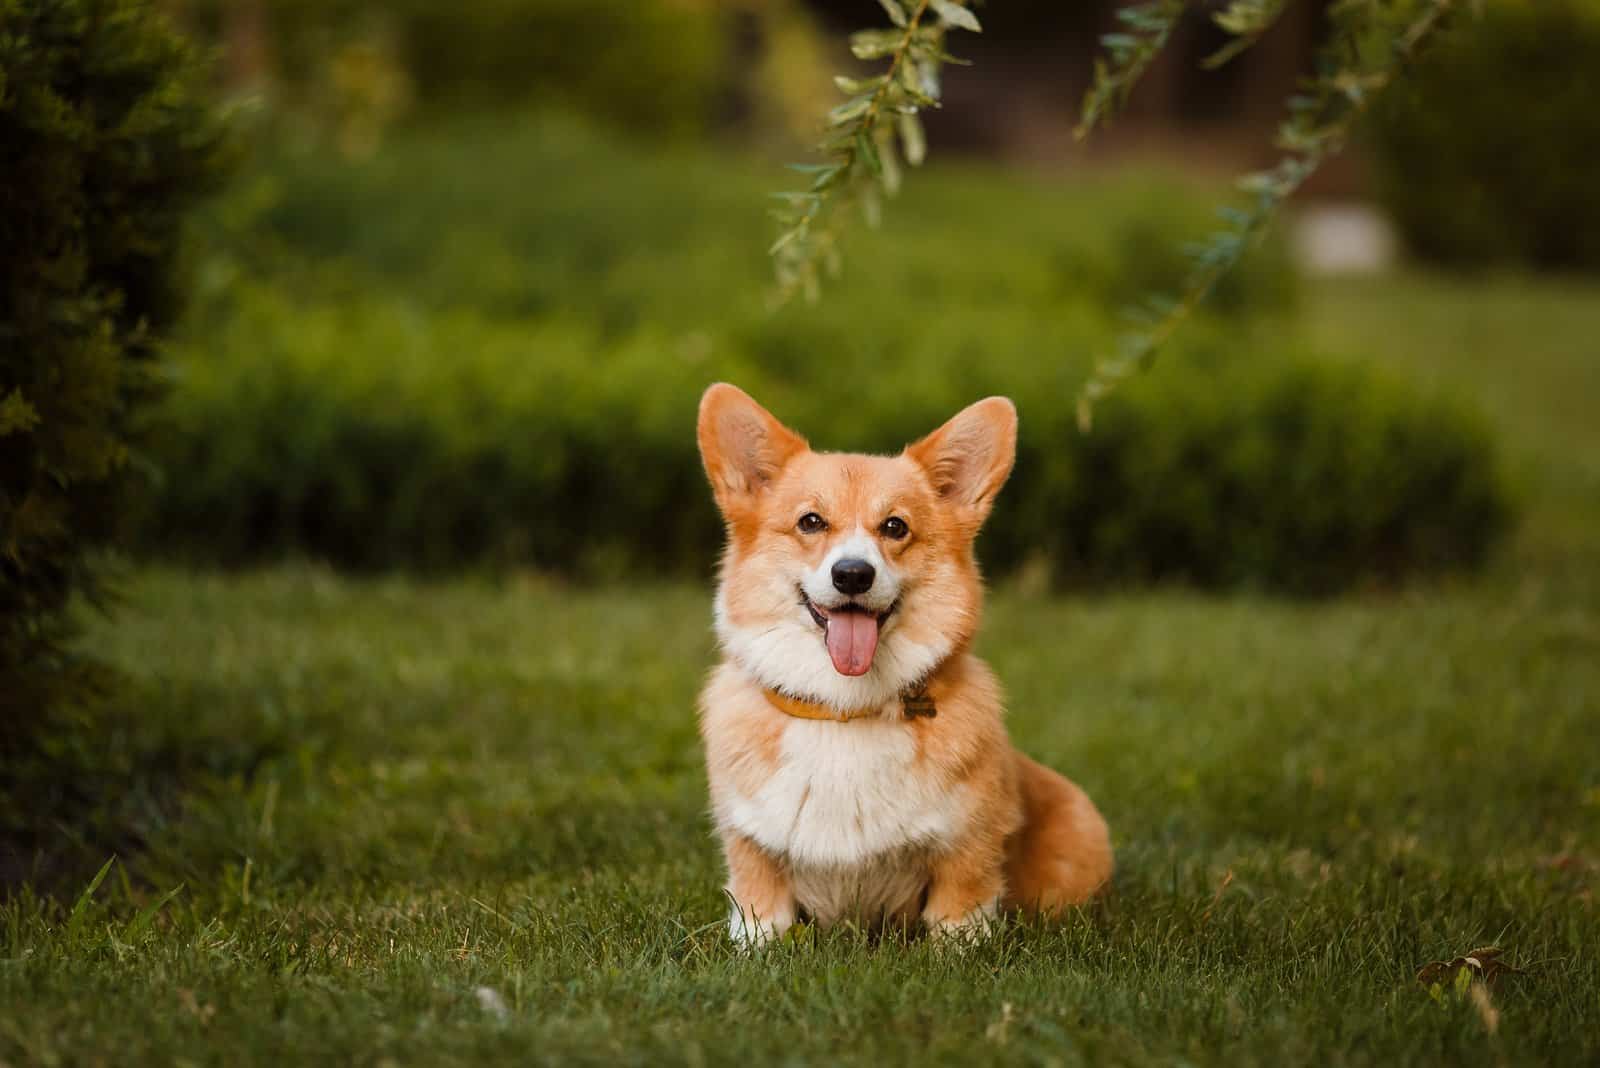 4 Best Corgi Breeders In Maine: Places To Buy Cute Puppies